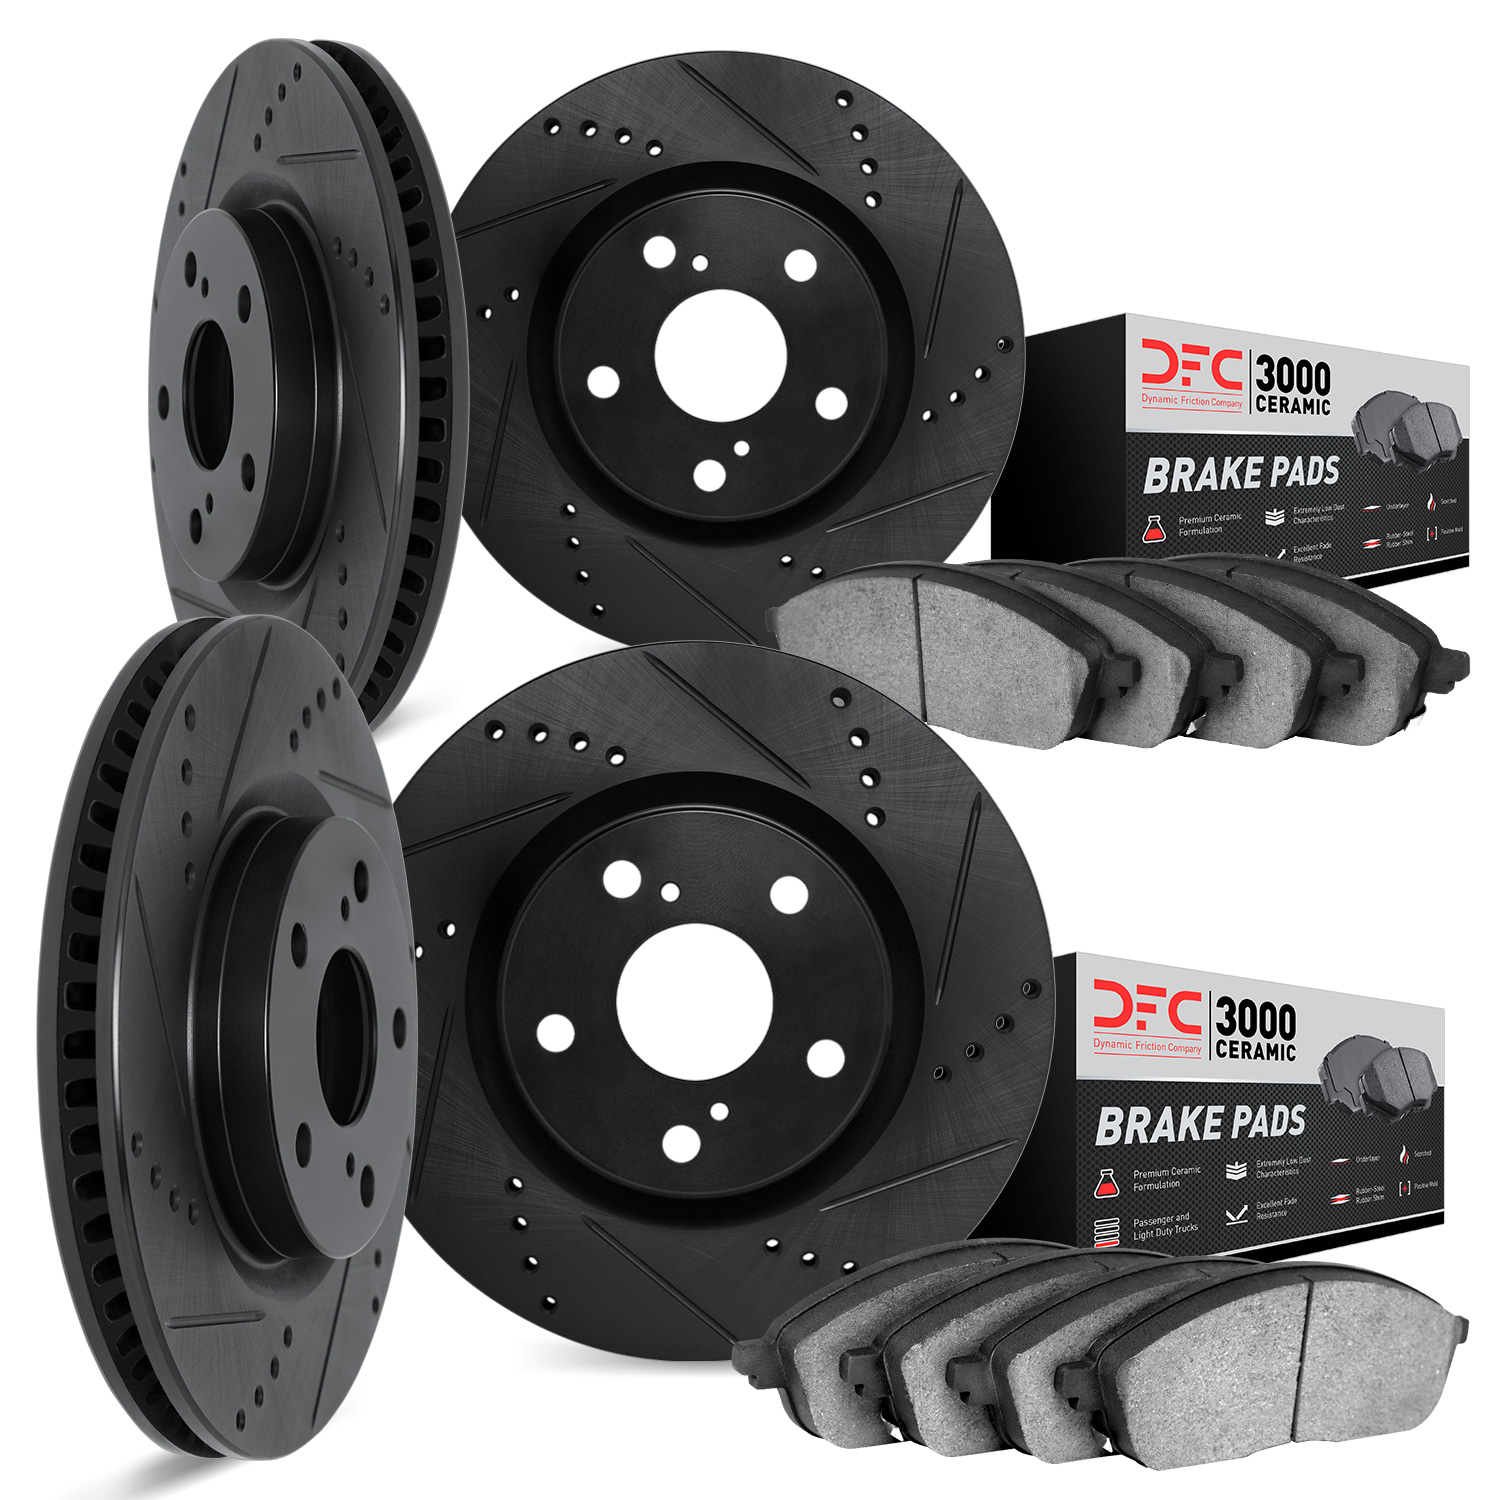 8304-31051 Drilled/Slotted Brake Rotors with 3000-Series Ceramic Brake Pads Kit [Black], 2004-2010 BMW, Position: Front and Rear